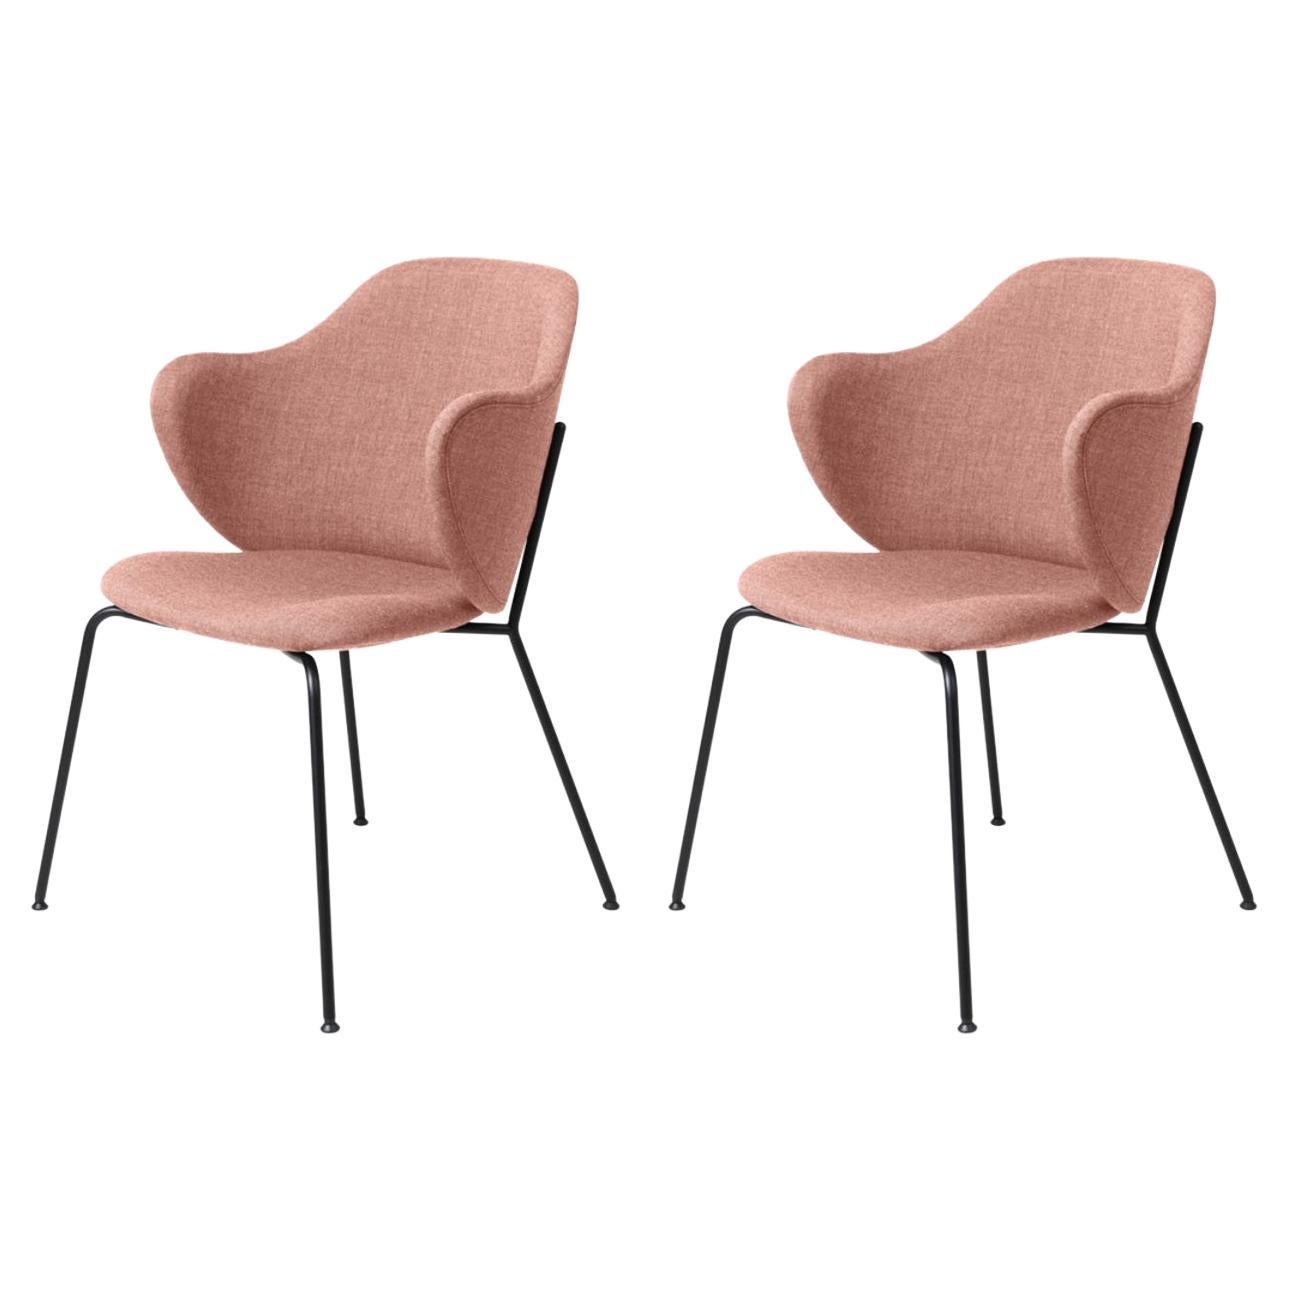 Set of 2 Rose Remix Lassen Chairs by Lassen For Sale